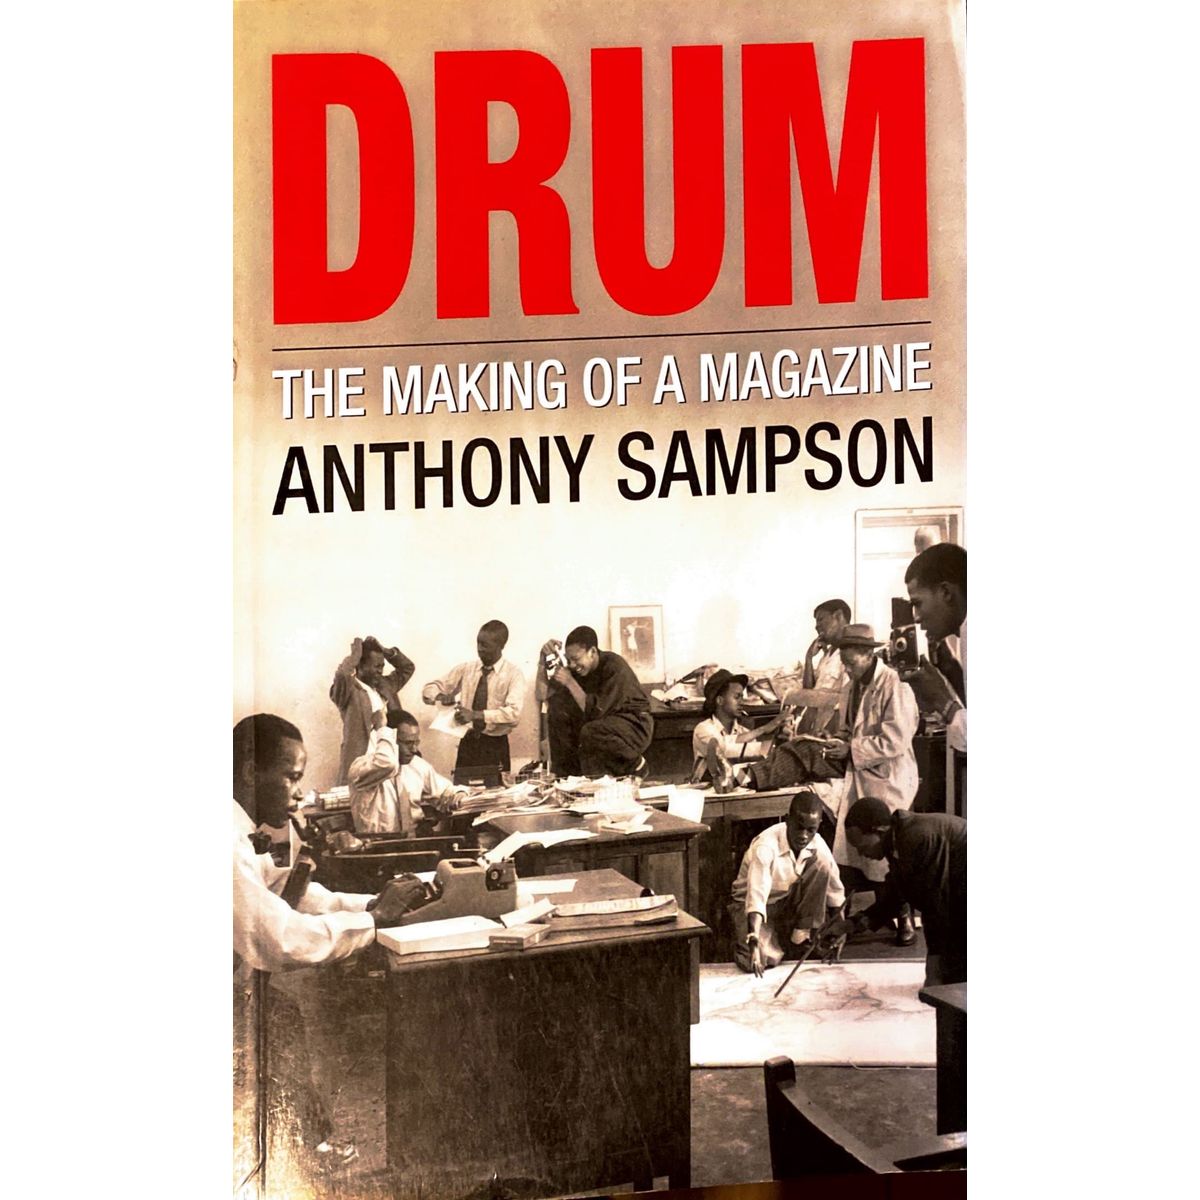 ISBN: 9781868422111 / 1868422119 - Drum: The Making of a Magazine by Anthony Sampson [2005]